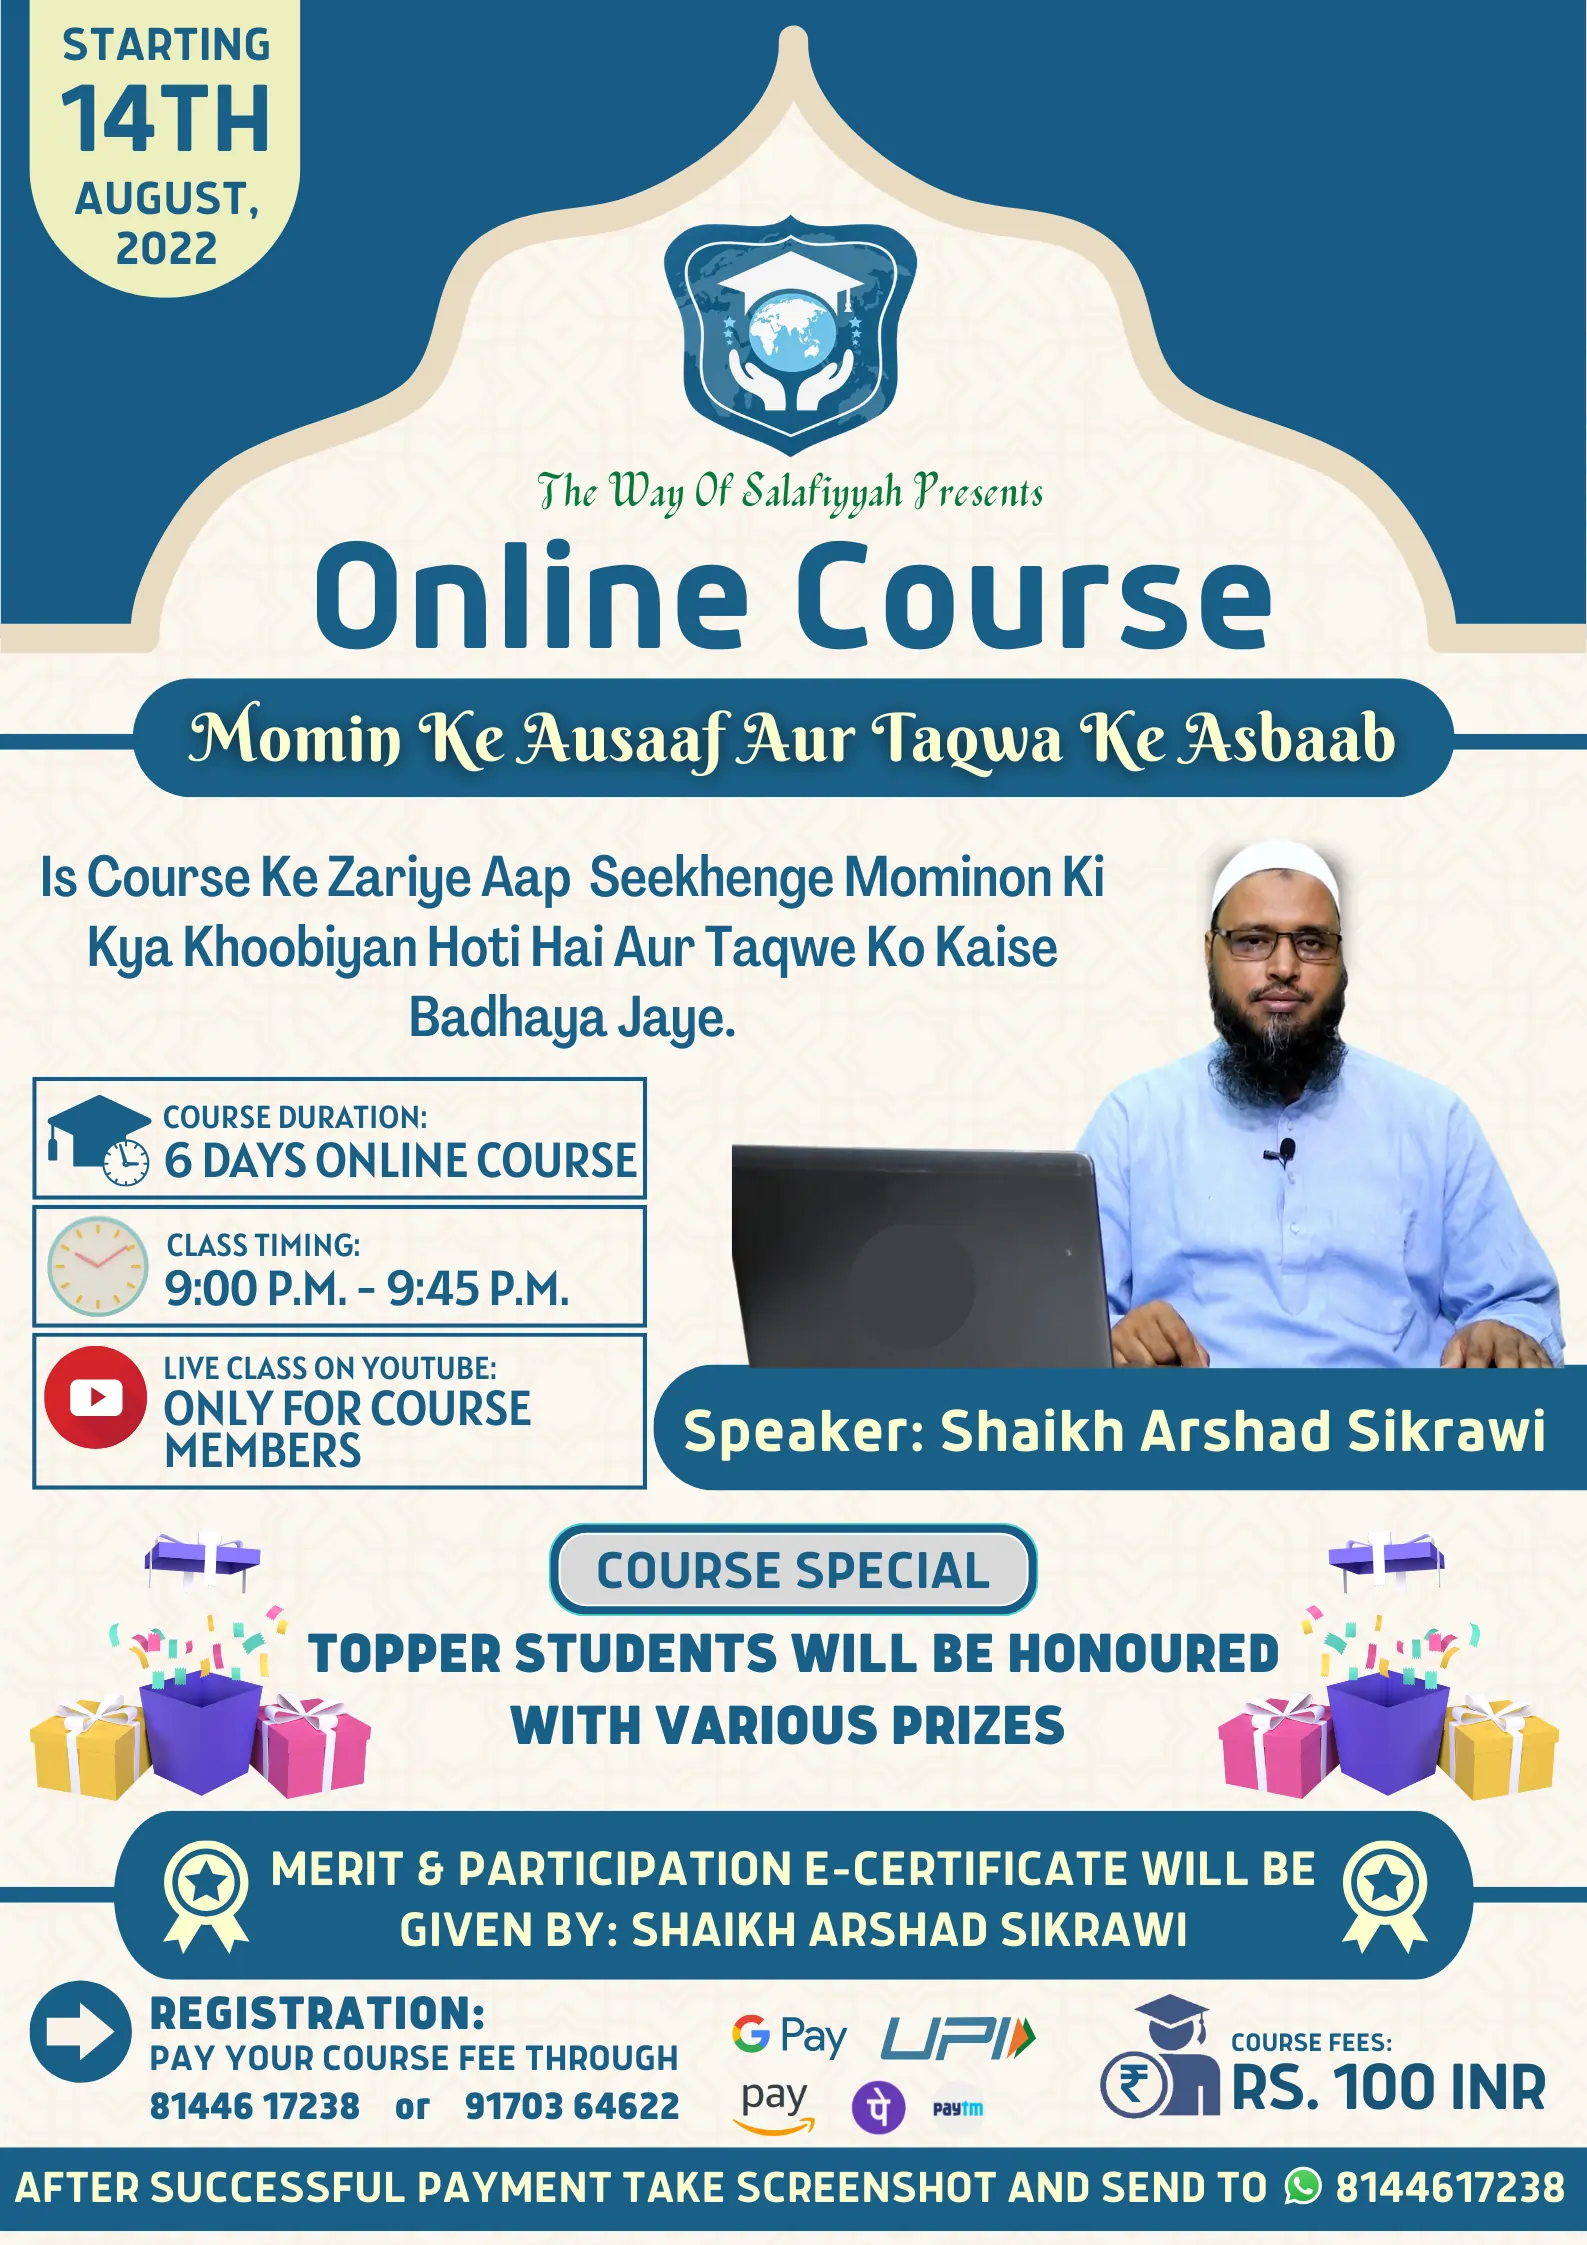 Another Online Course